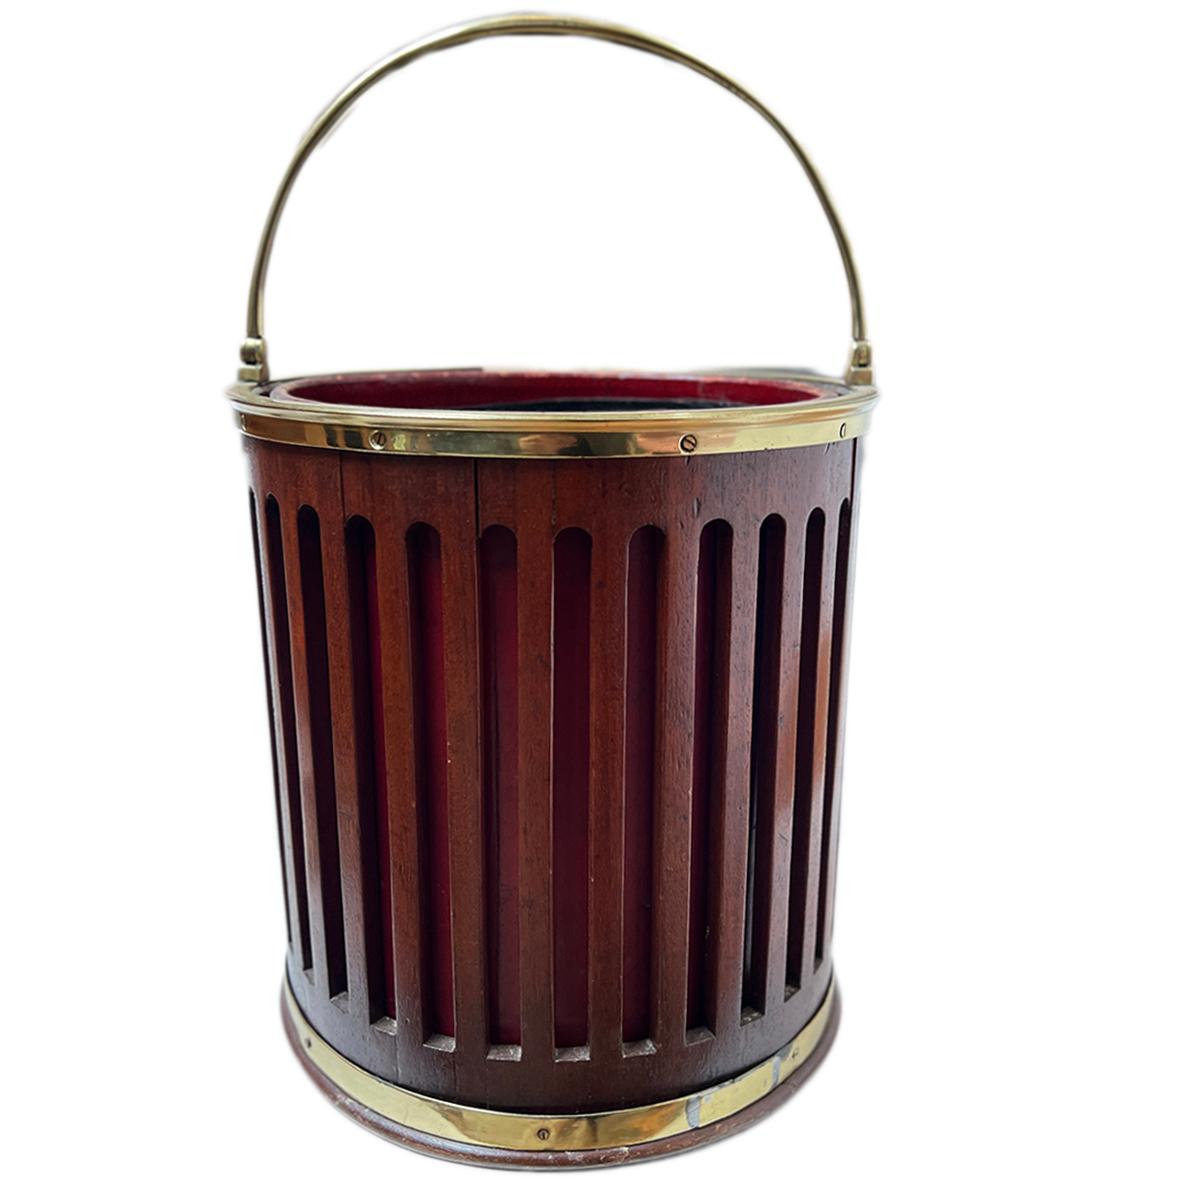 A circa 1950's English mahogany and leather bucket.

Measurements:
Height1: 13